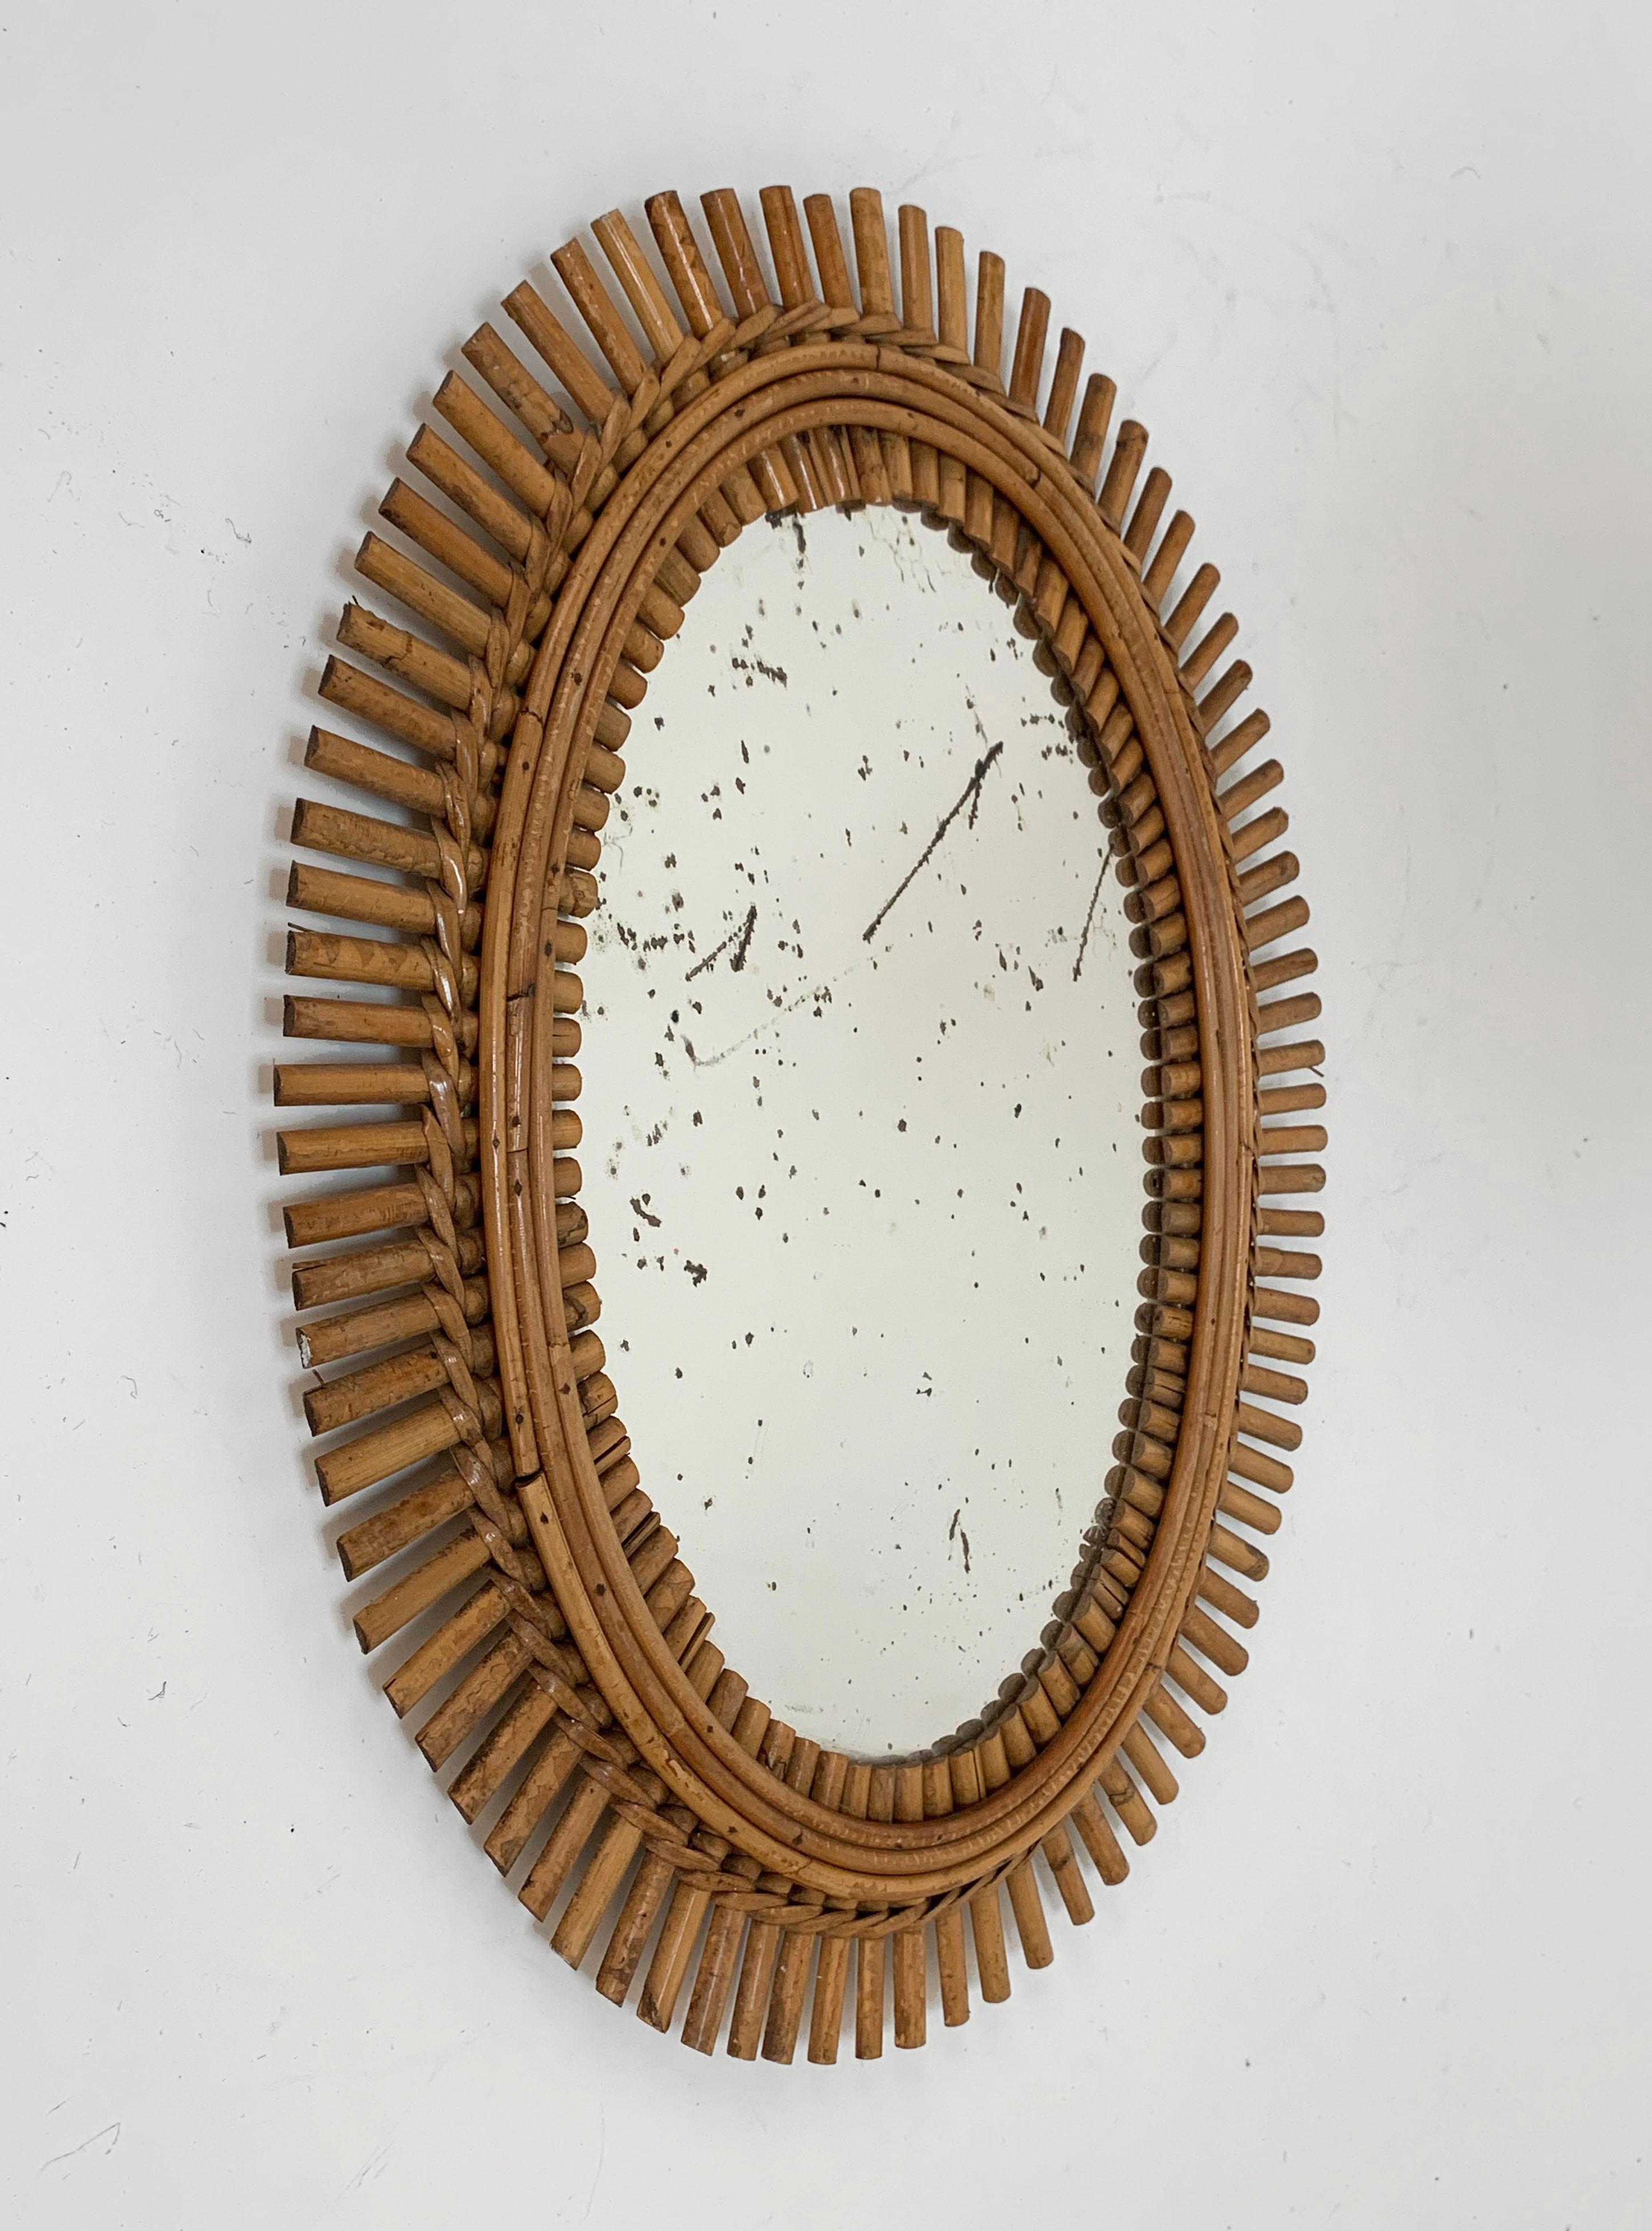 French Riviera oval wall mirror in bamboo and rattan, 1960s midcentury.
The mirror is original, has the signs of the time. We can also replace it with a new one without additional costs. 
Measures: Cm 55 x 42.